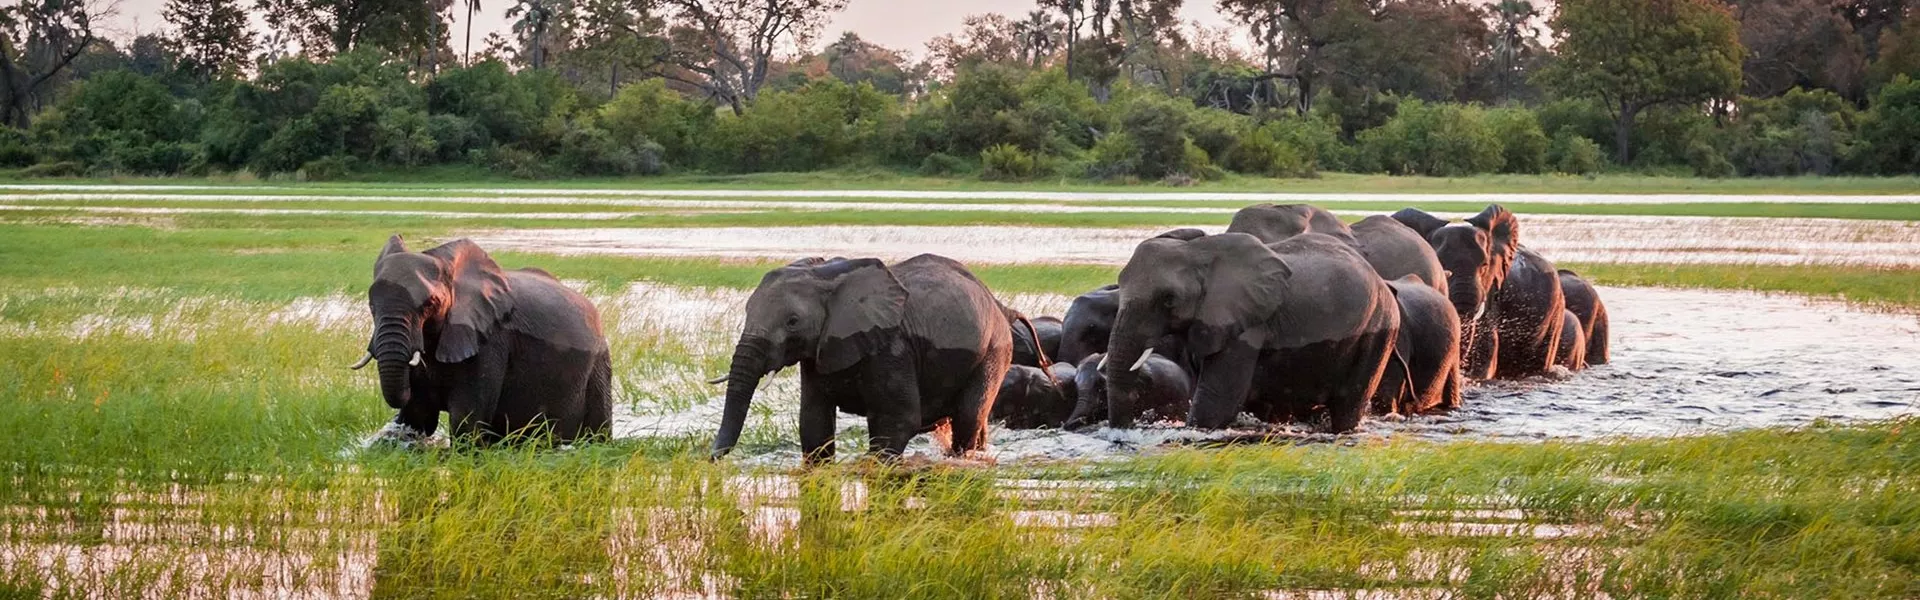 A herd of elephants standing in a body of water among greenery